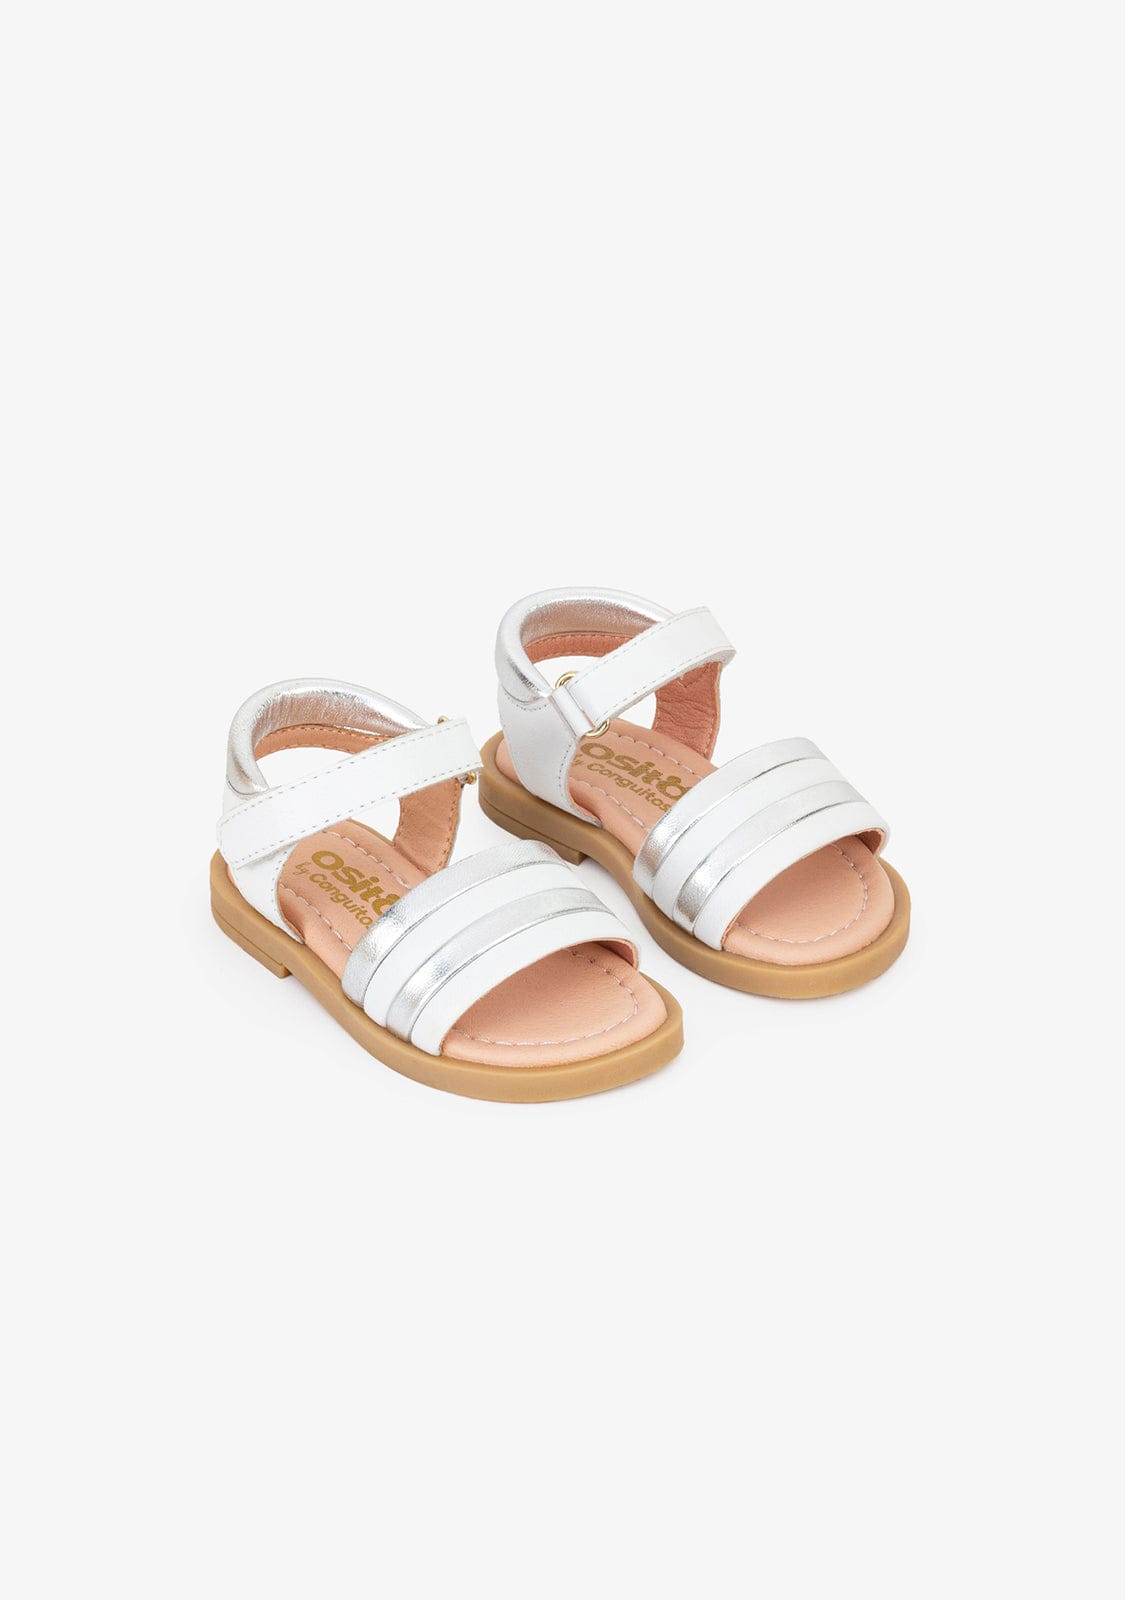 OSITO Shoes Baby's Stripes White Leather Sandals